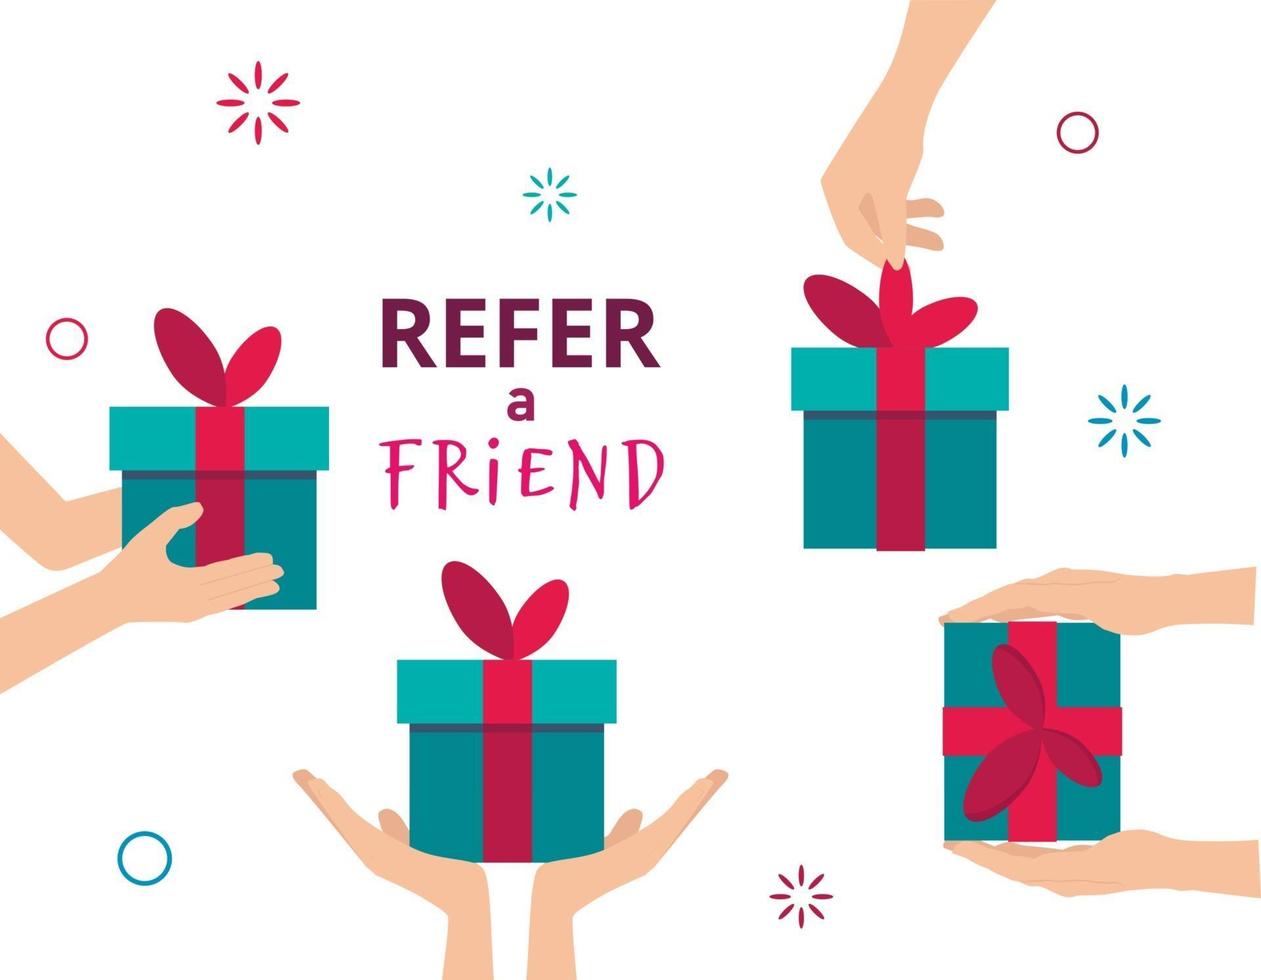 Refer a Friend. Referral marketing concept. Illustration of two people vector